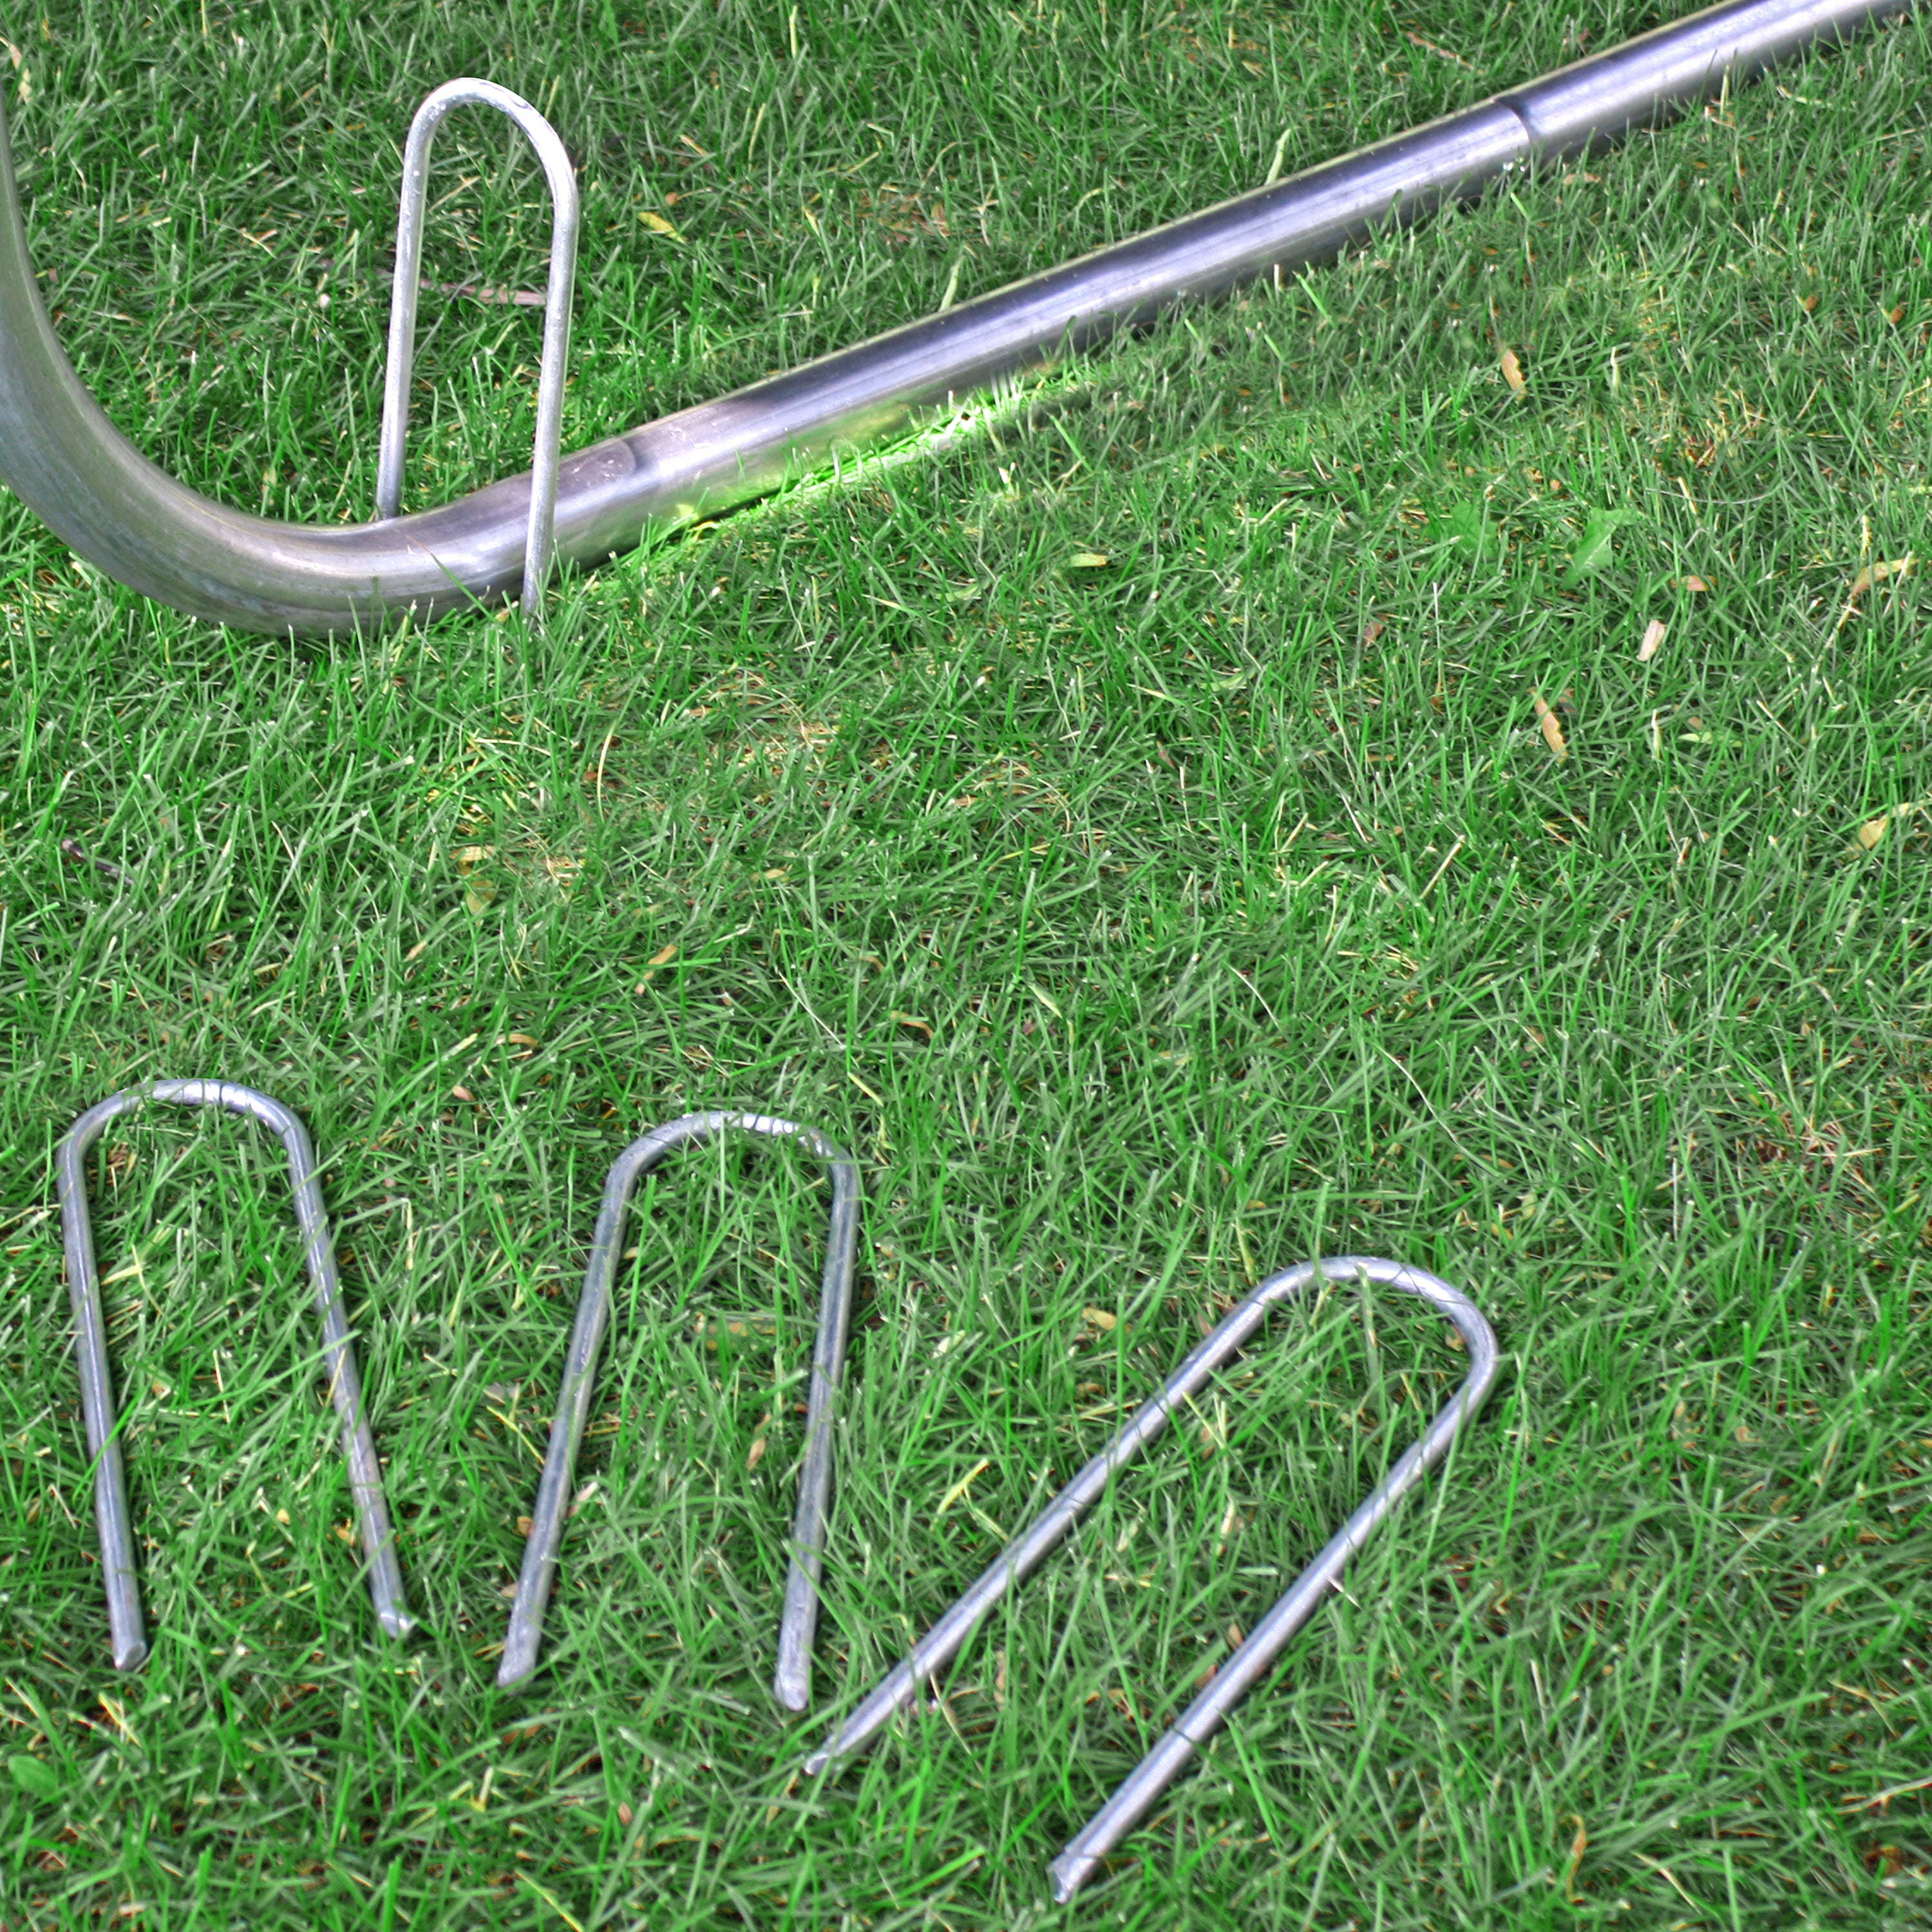 Three wind stakes lay on the grass while one wind stake is placed over the trampoline leg. 